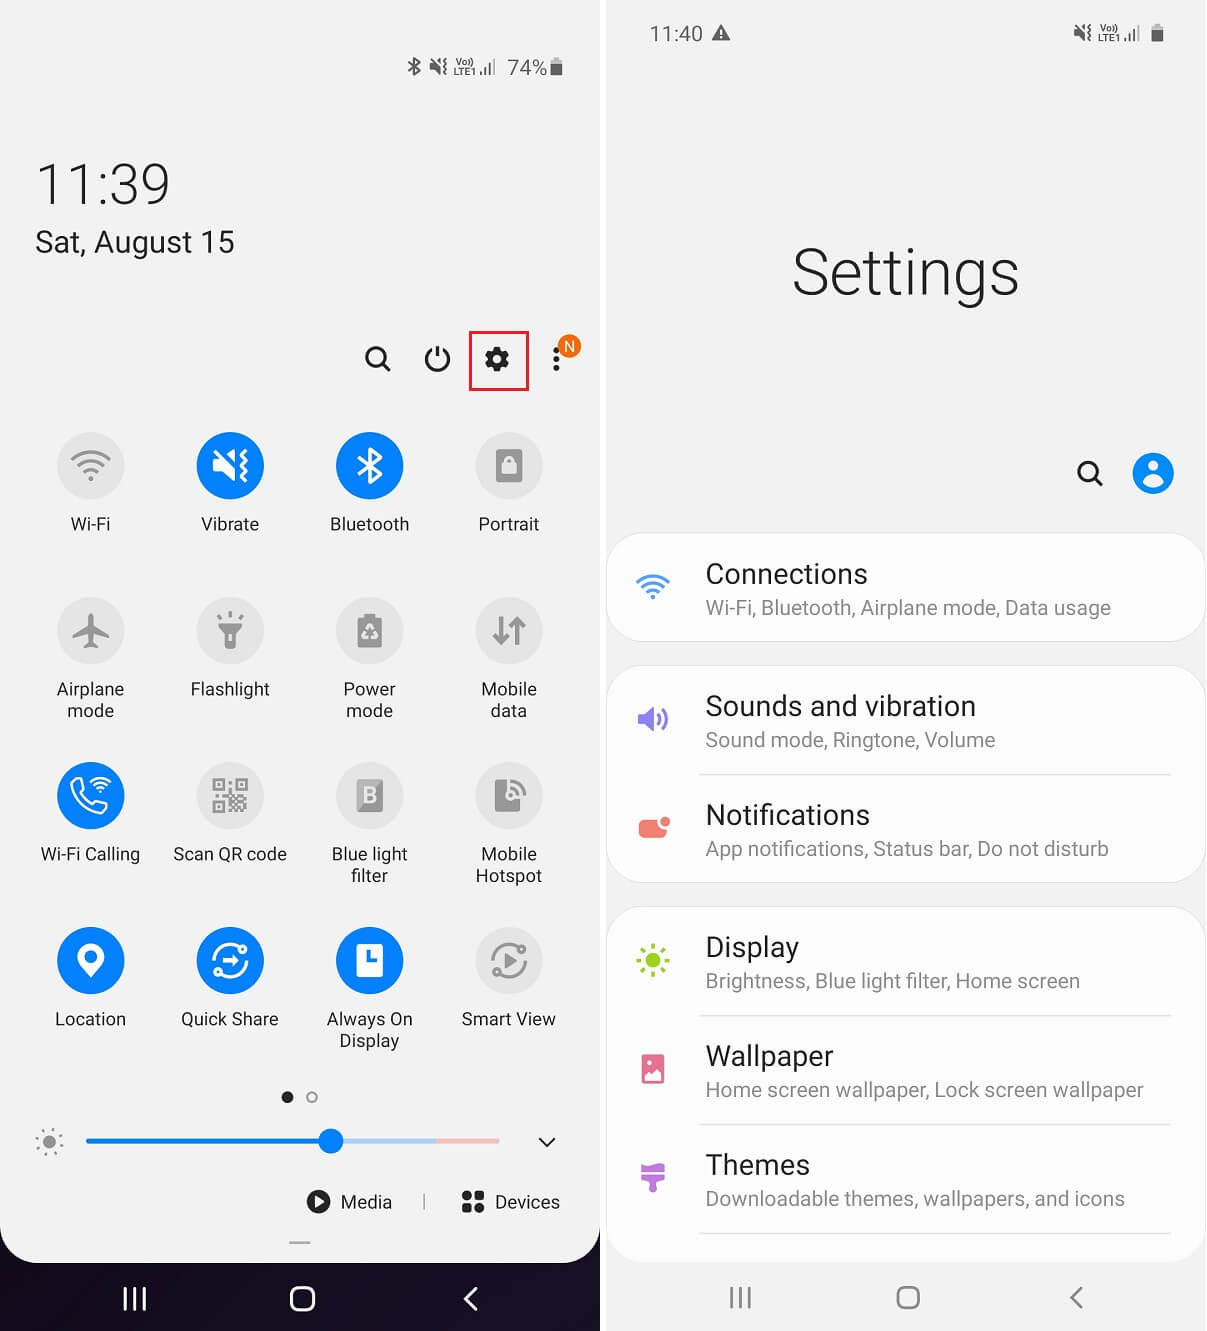 Open Settings on your Android device.
Scroll down and tap on About Phone or System.